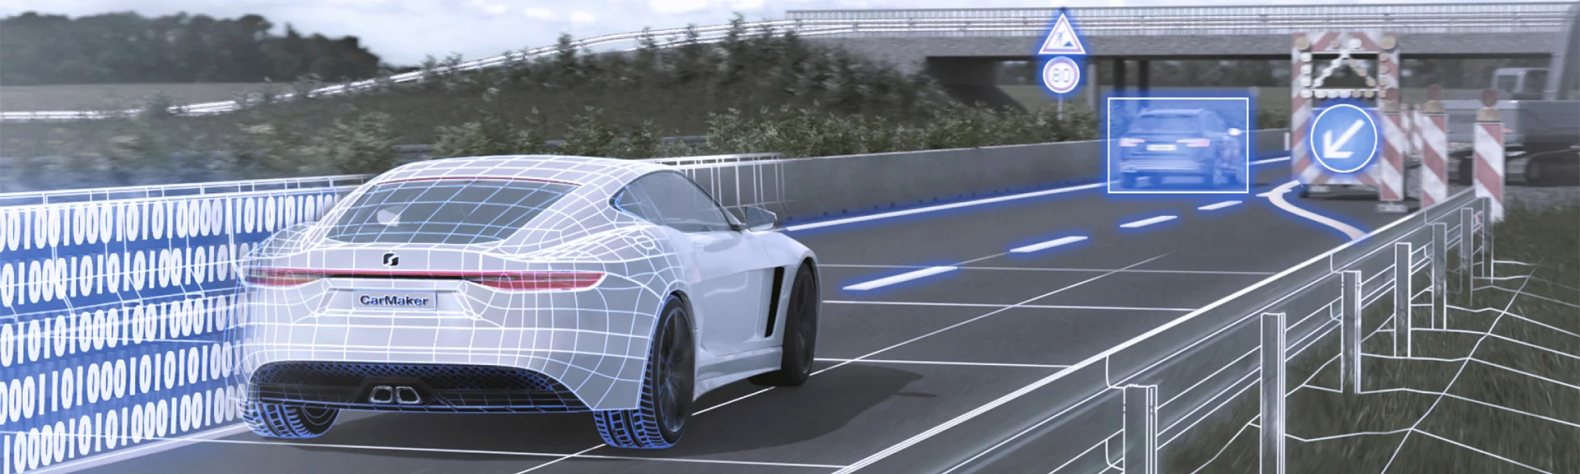 Car tracking surrounding objects with the bounding box to recognize and make decisions for automated driving.